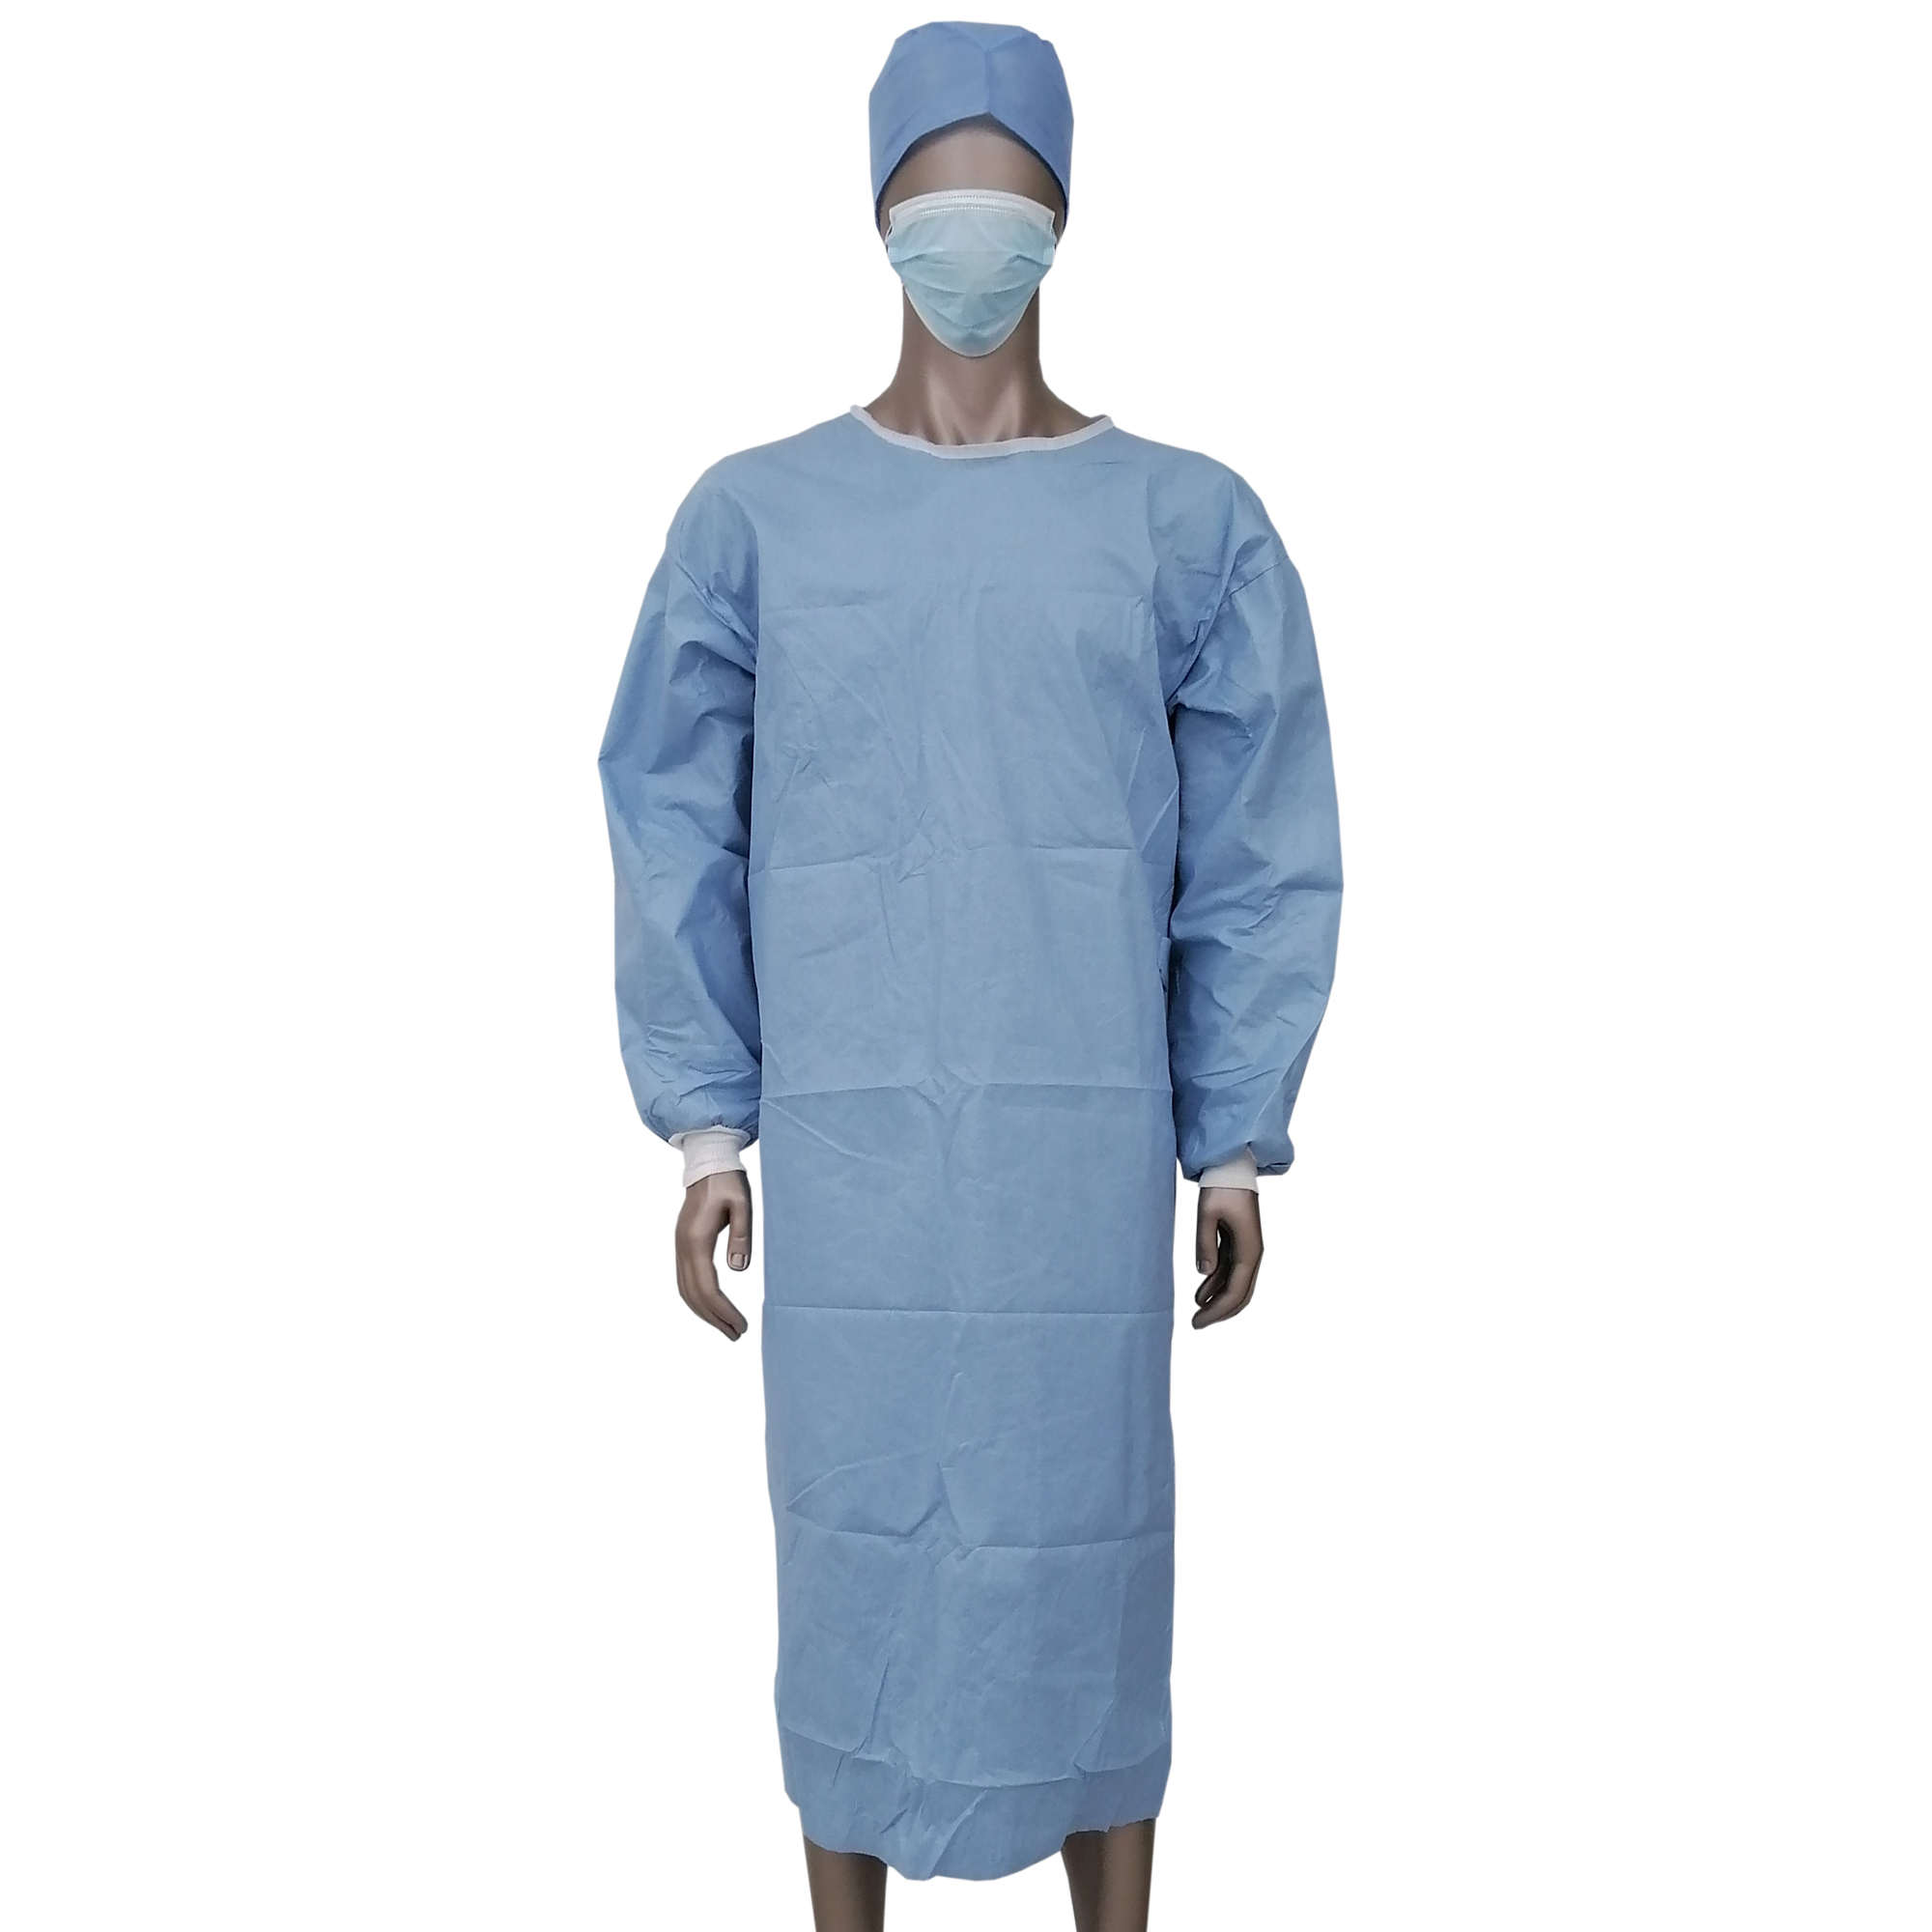 Surgical Hospital PP Protective Clothes